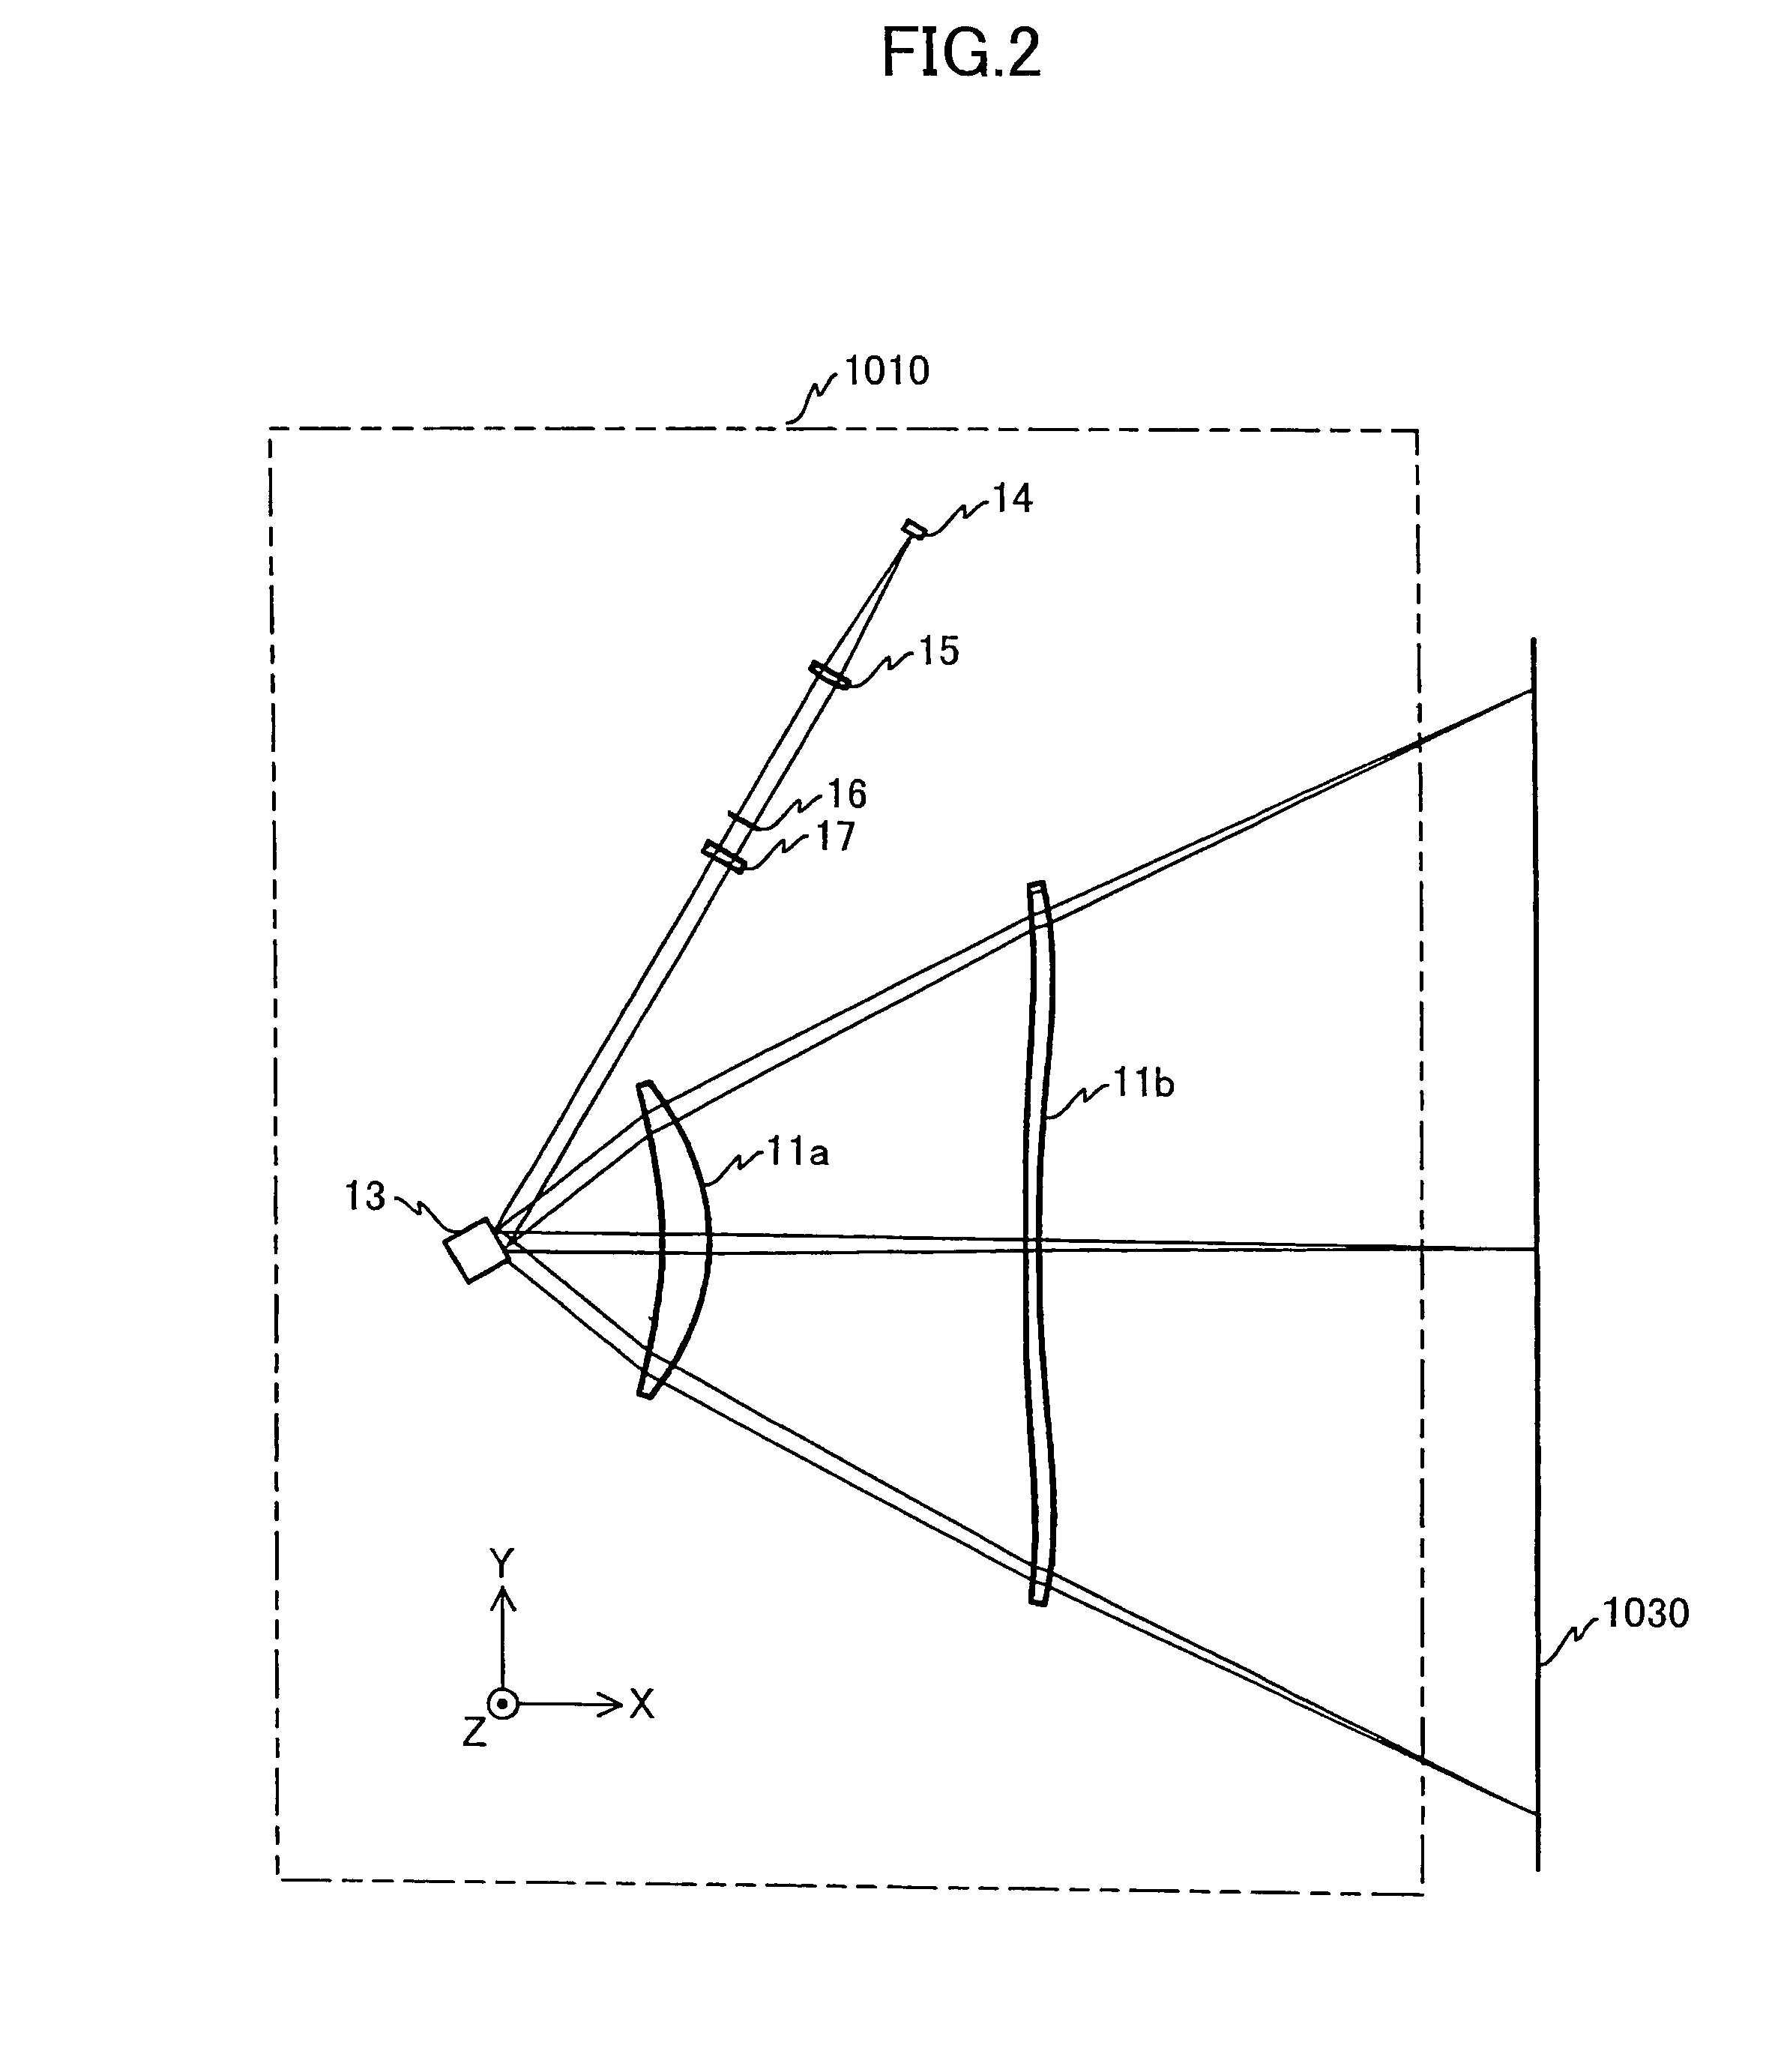 Surface-emitting laser array, optical scanning device, and image forming device